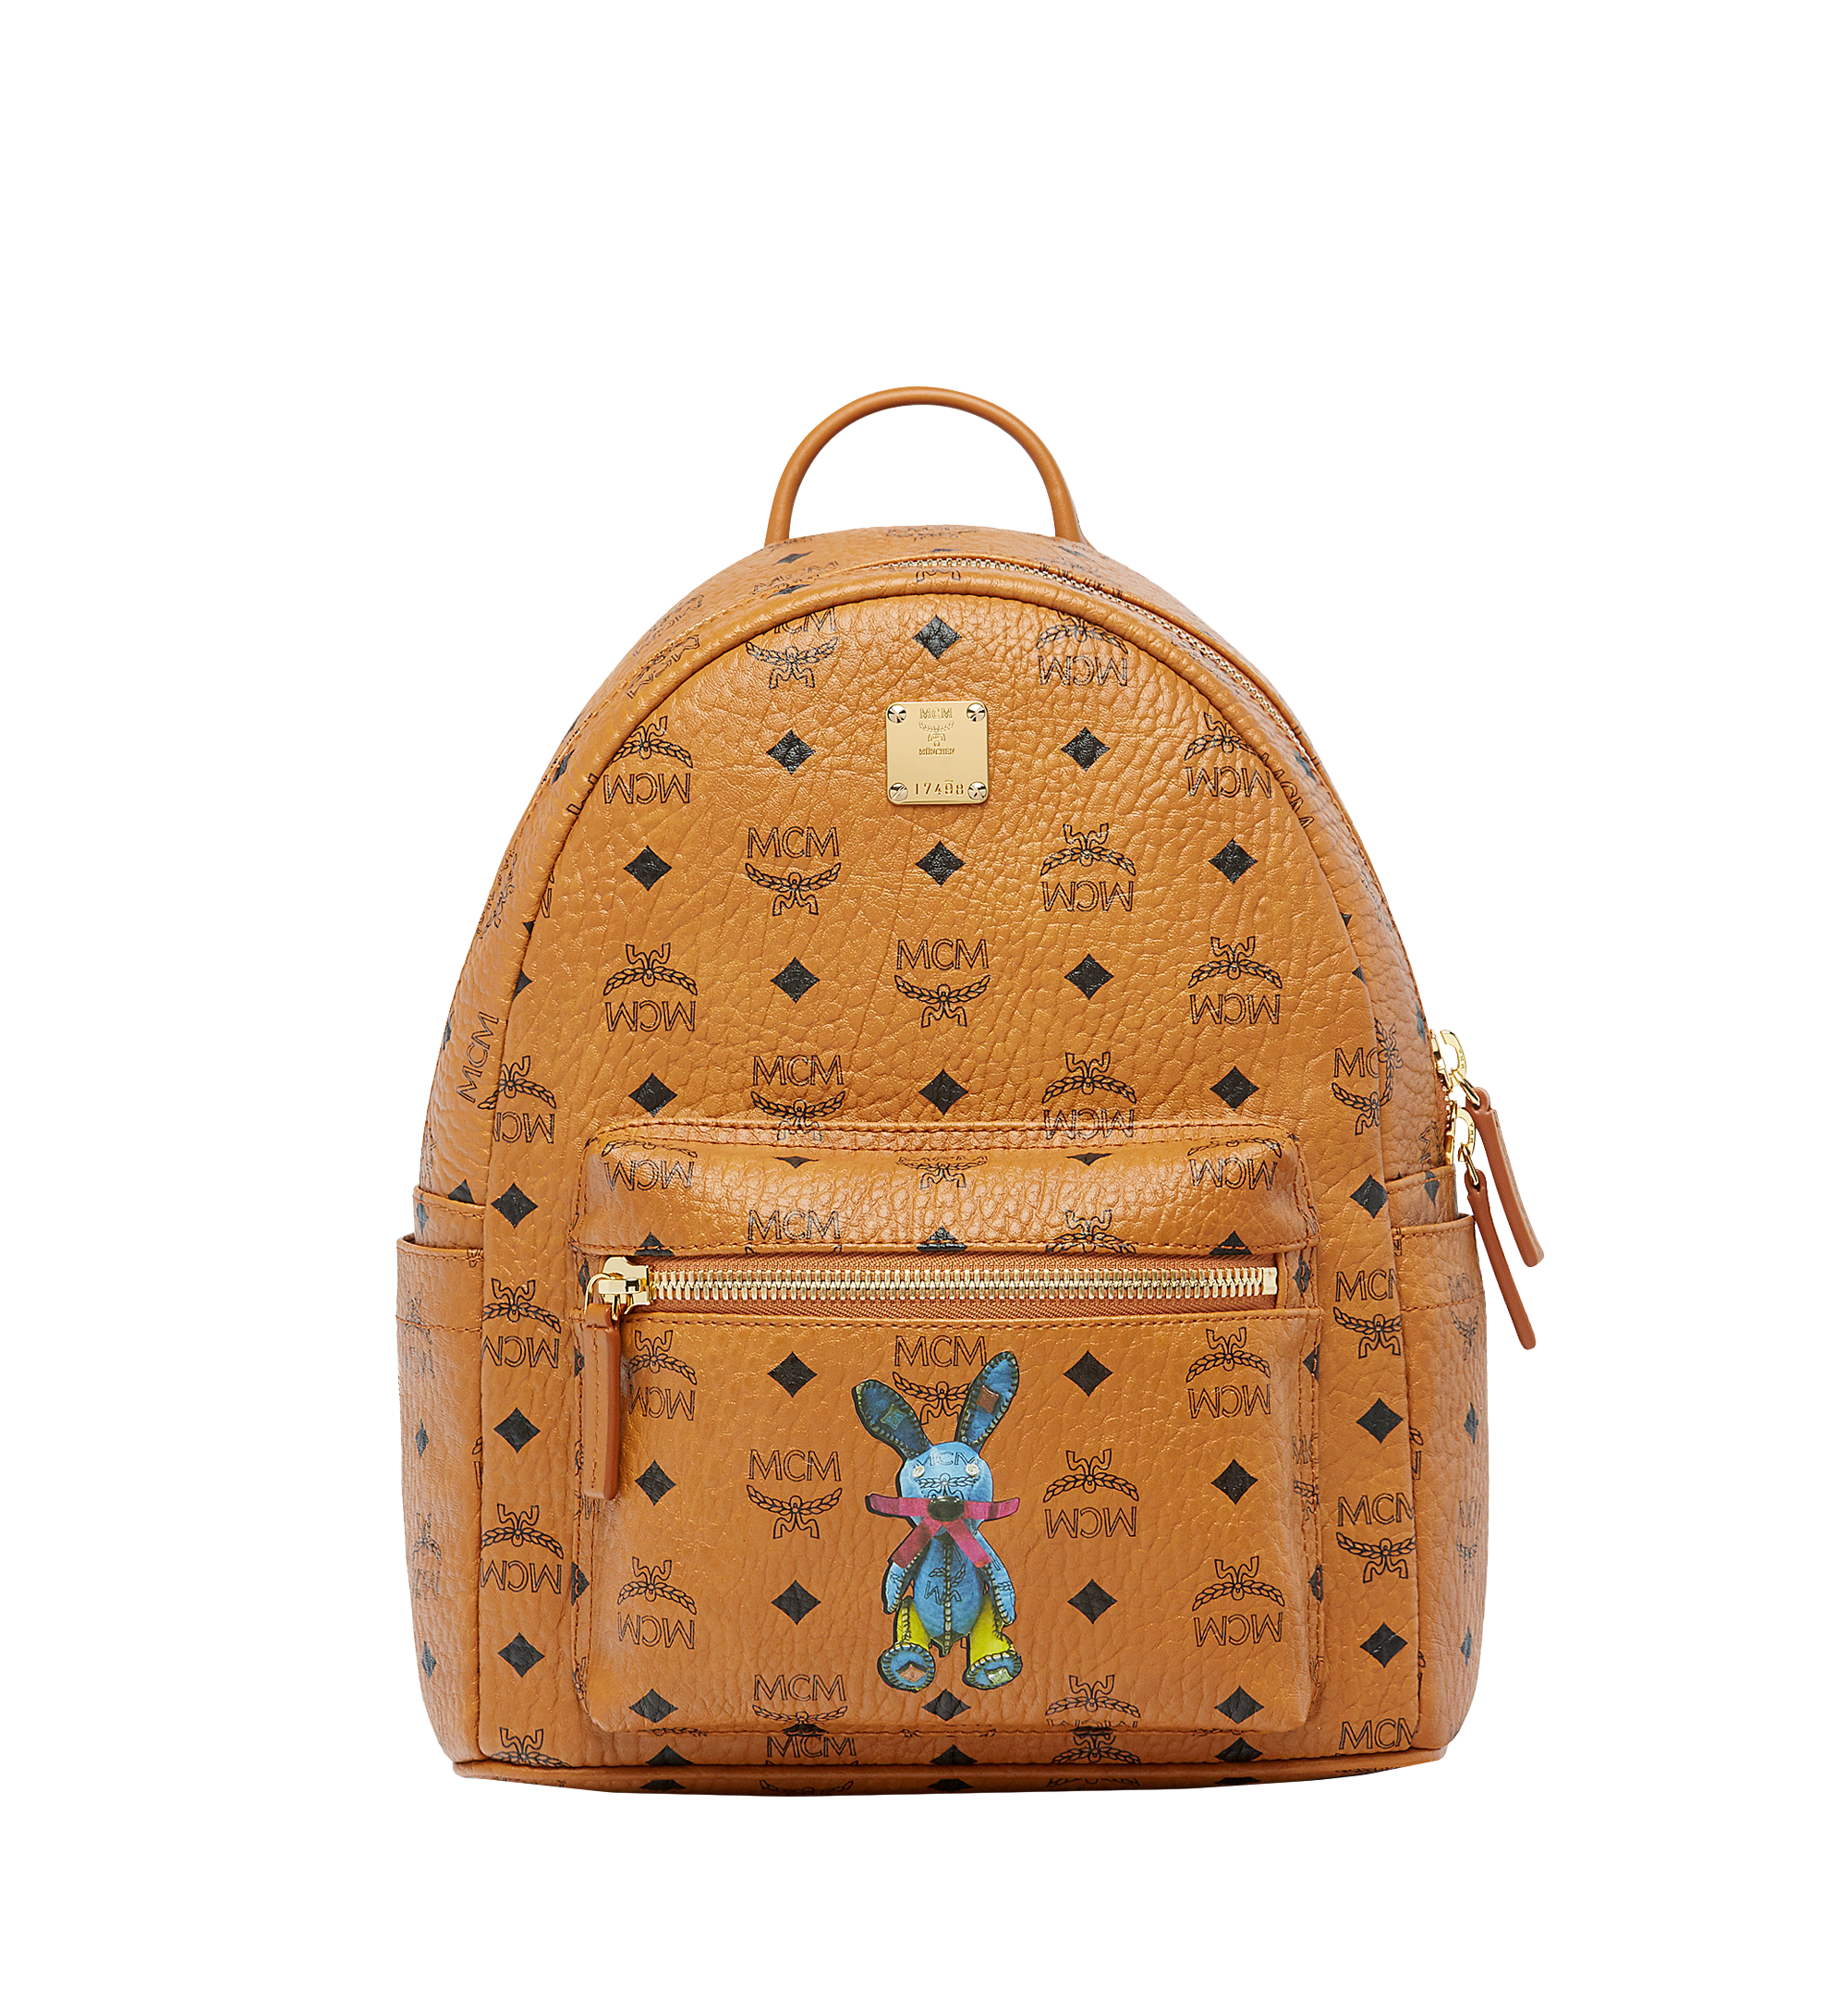 Women's Leather Backpacks | MCM